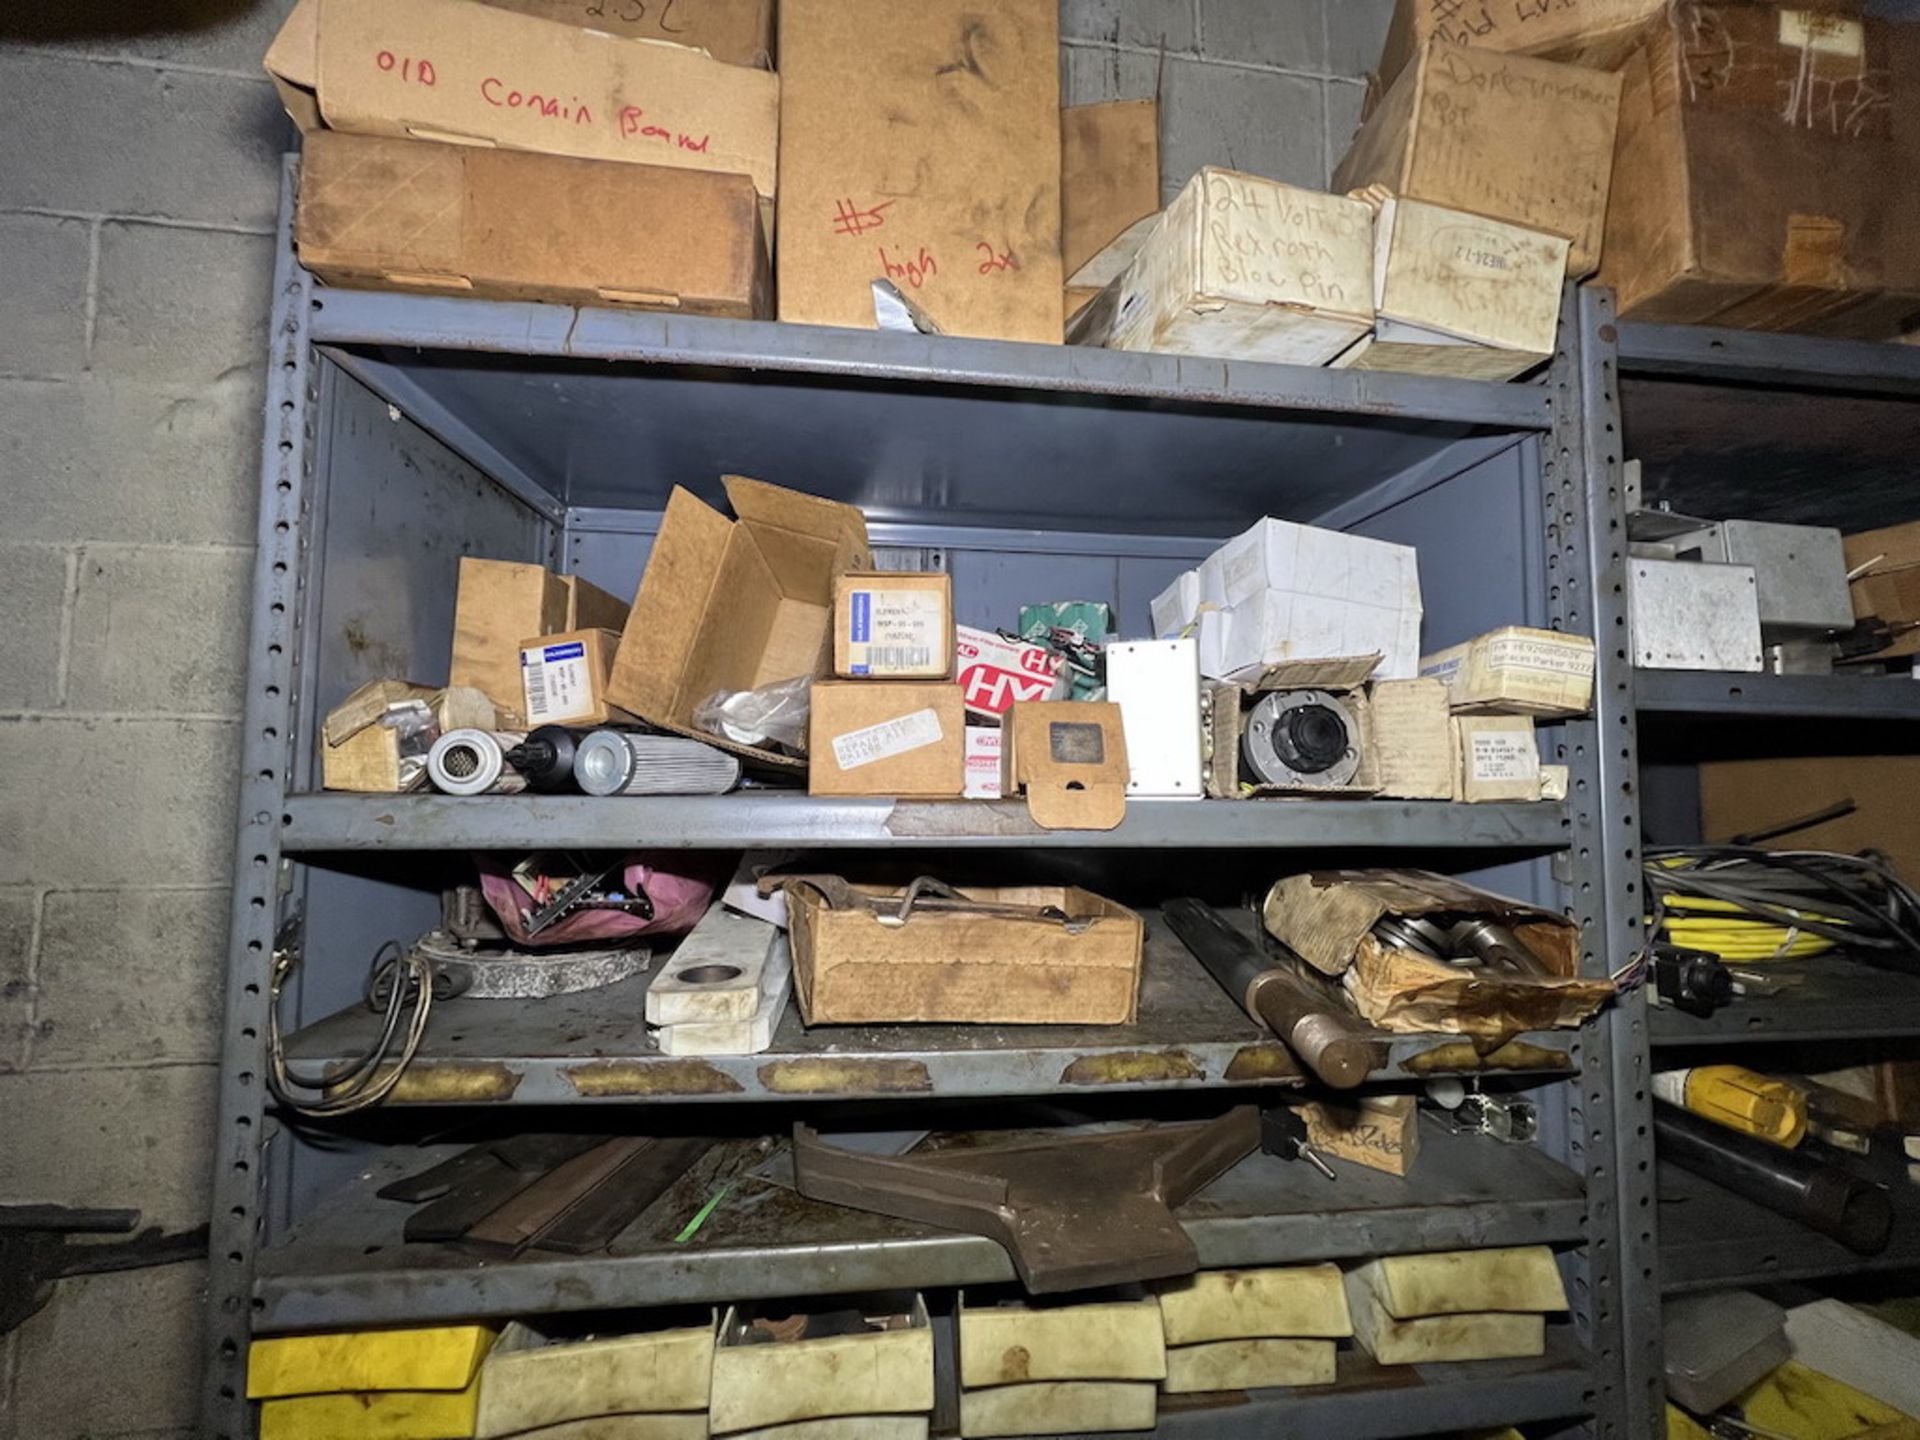 Remaining Contents of Parts Room - Image 26 of 60